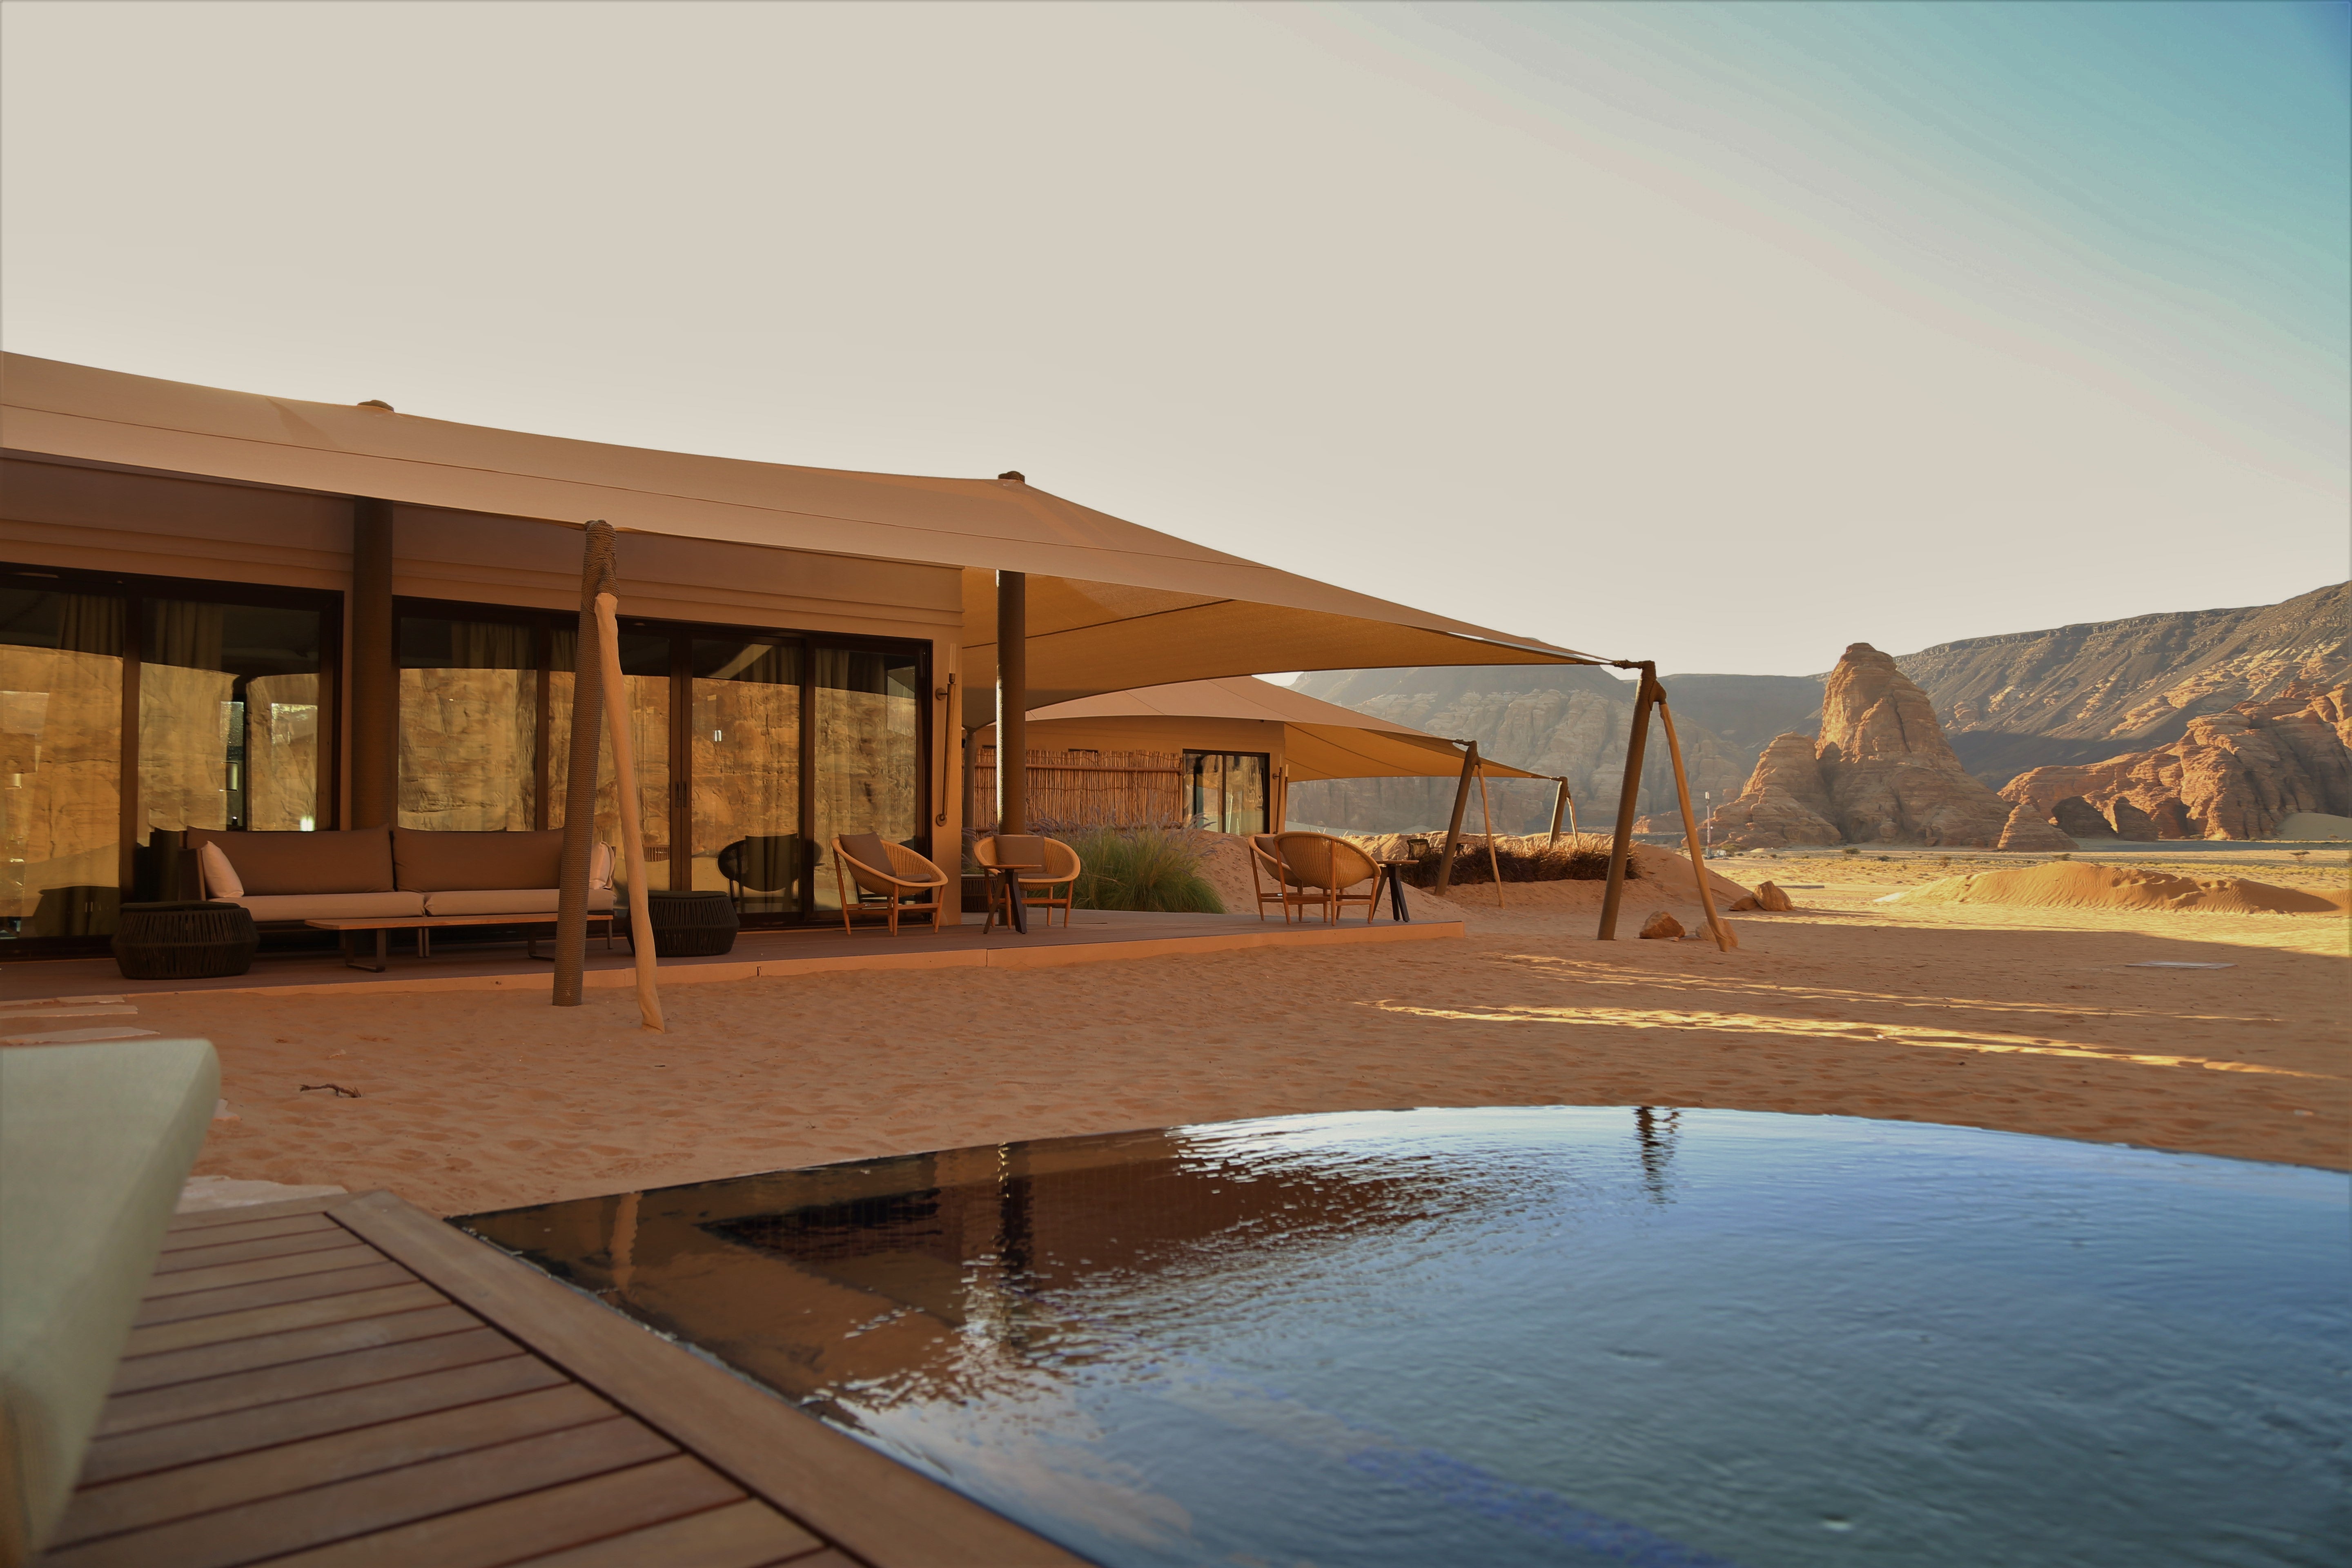 The Ashar Resort will offer new eco-tourism experiences